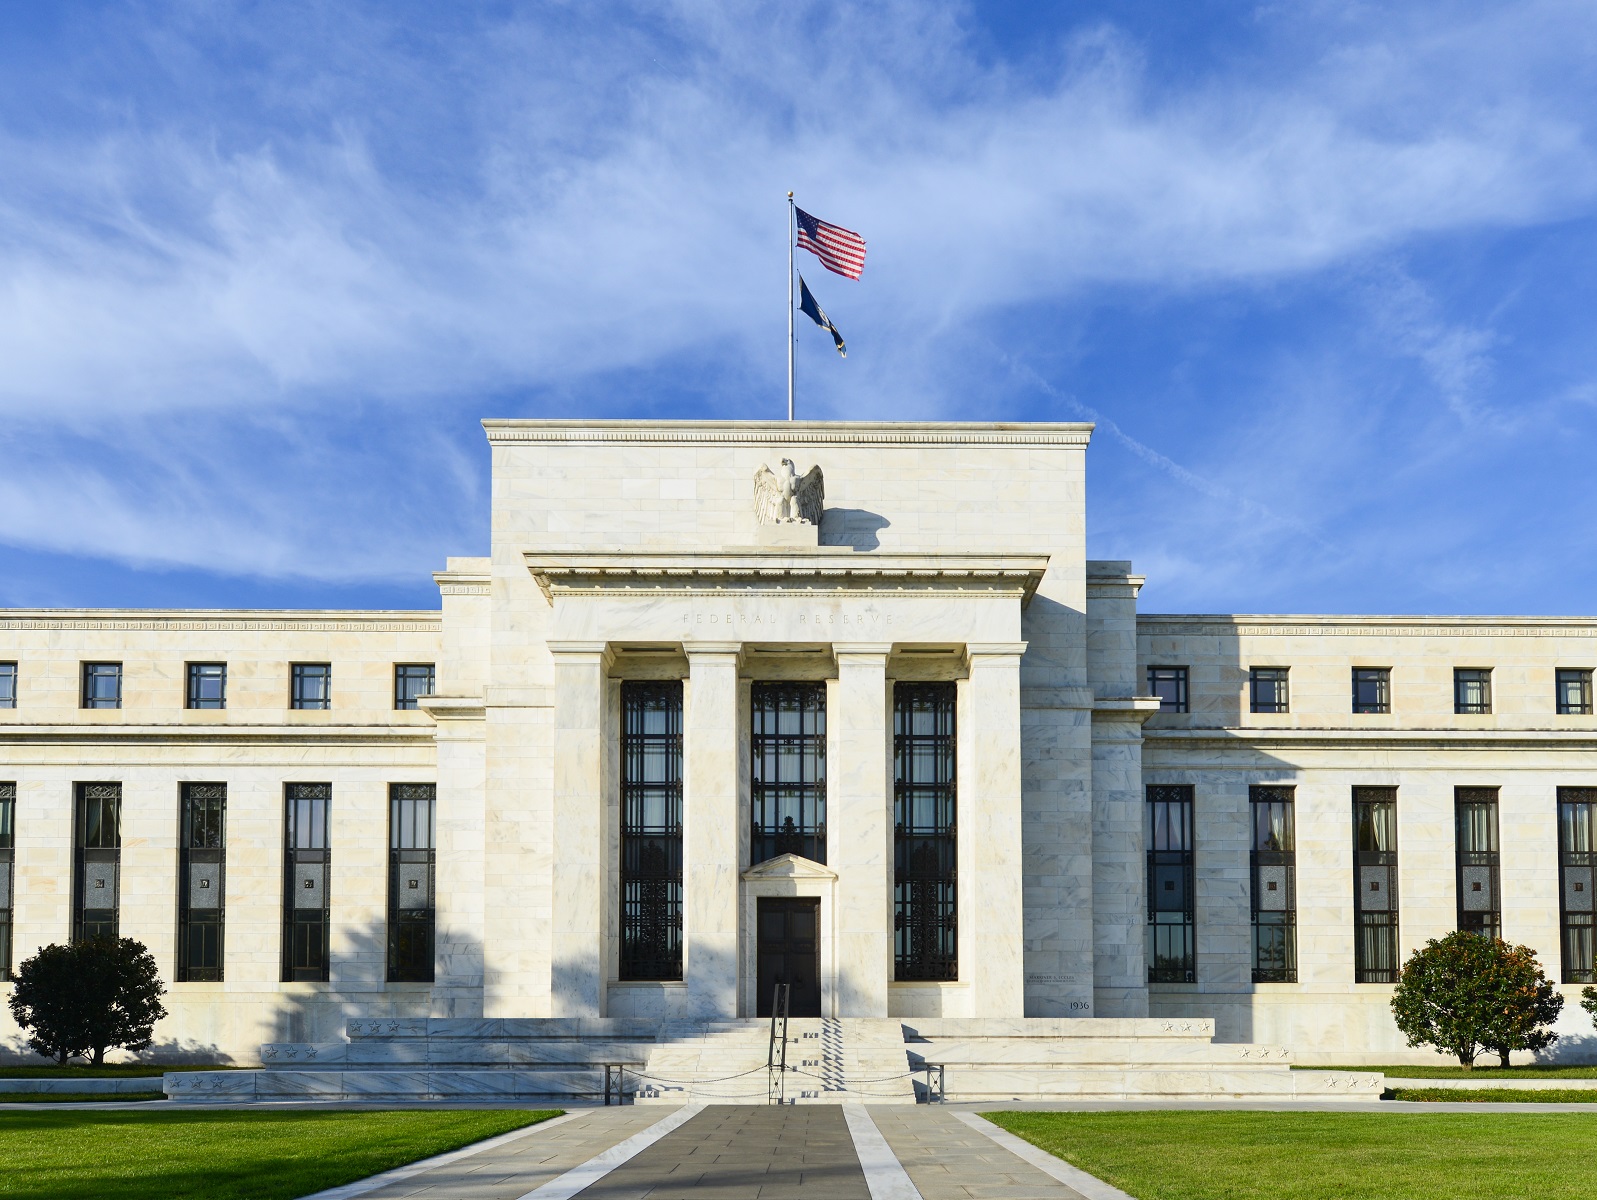 New Hire to Head Digital Currency Research at the Fed